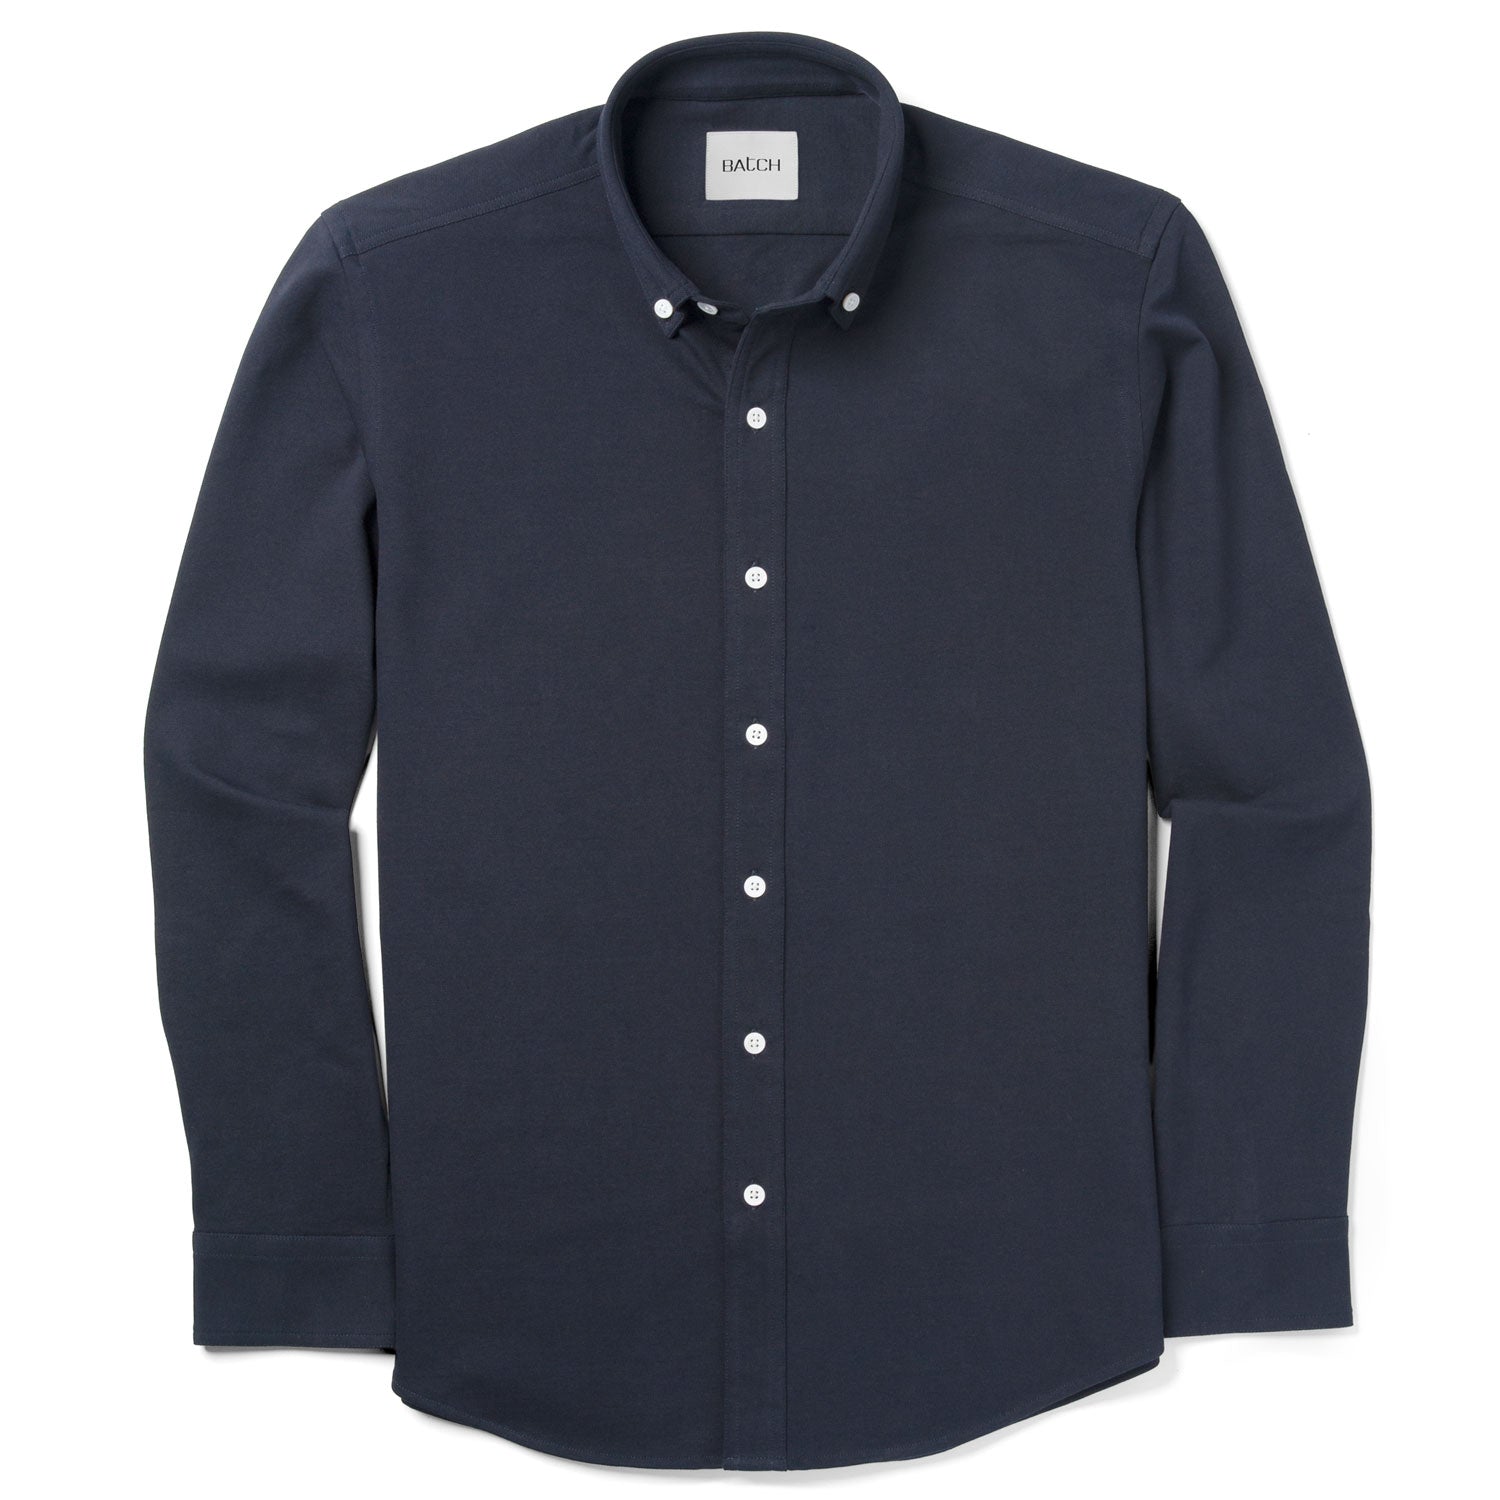 Essential Casual Knit Shirt - WB Navy Cotton Knit Pique